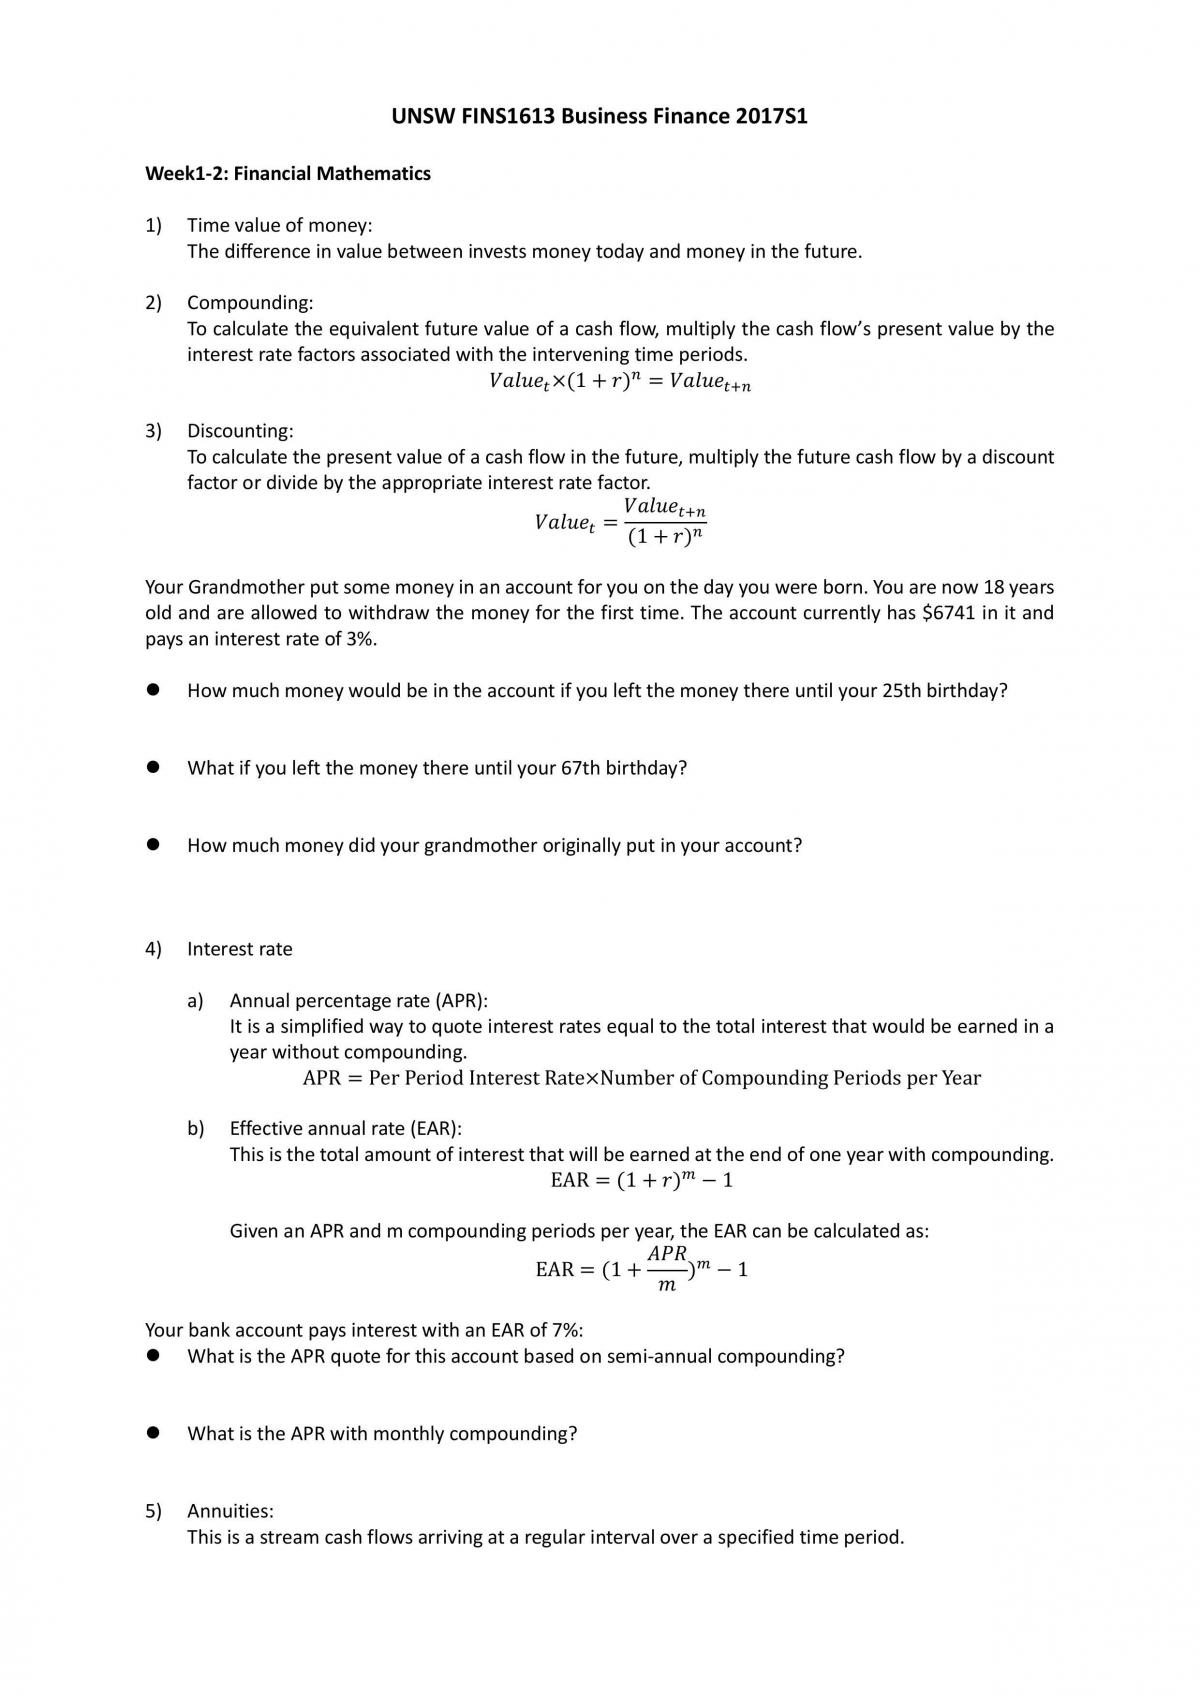 FINS1613 Business Finance Complete Study Notes - Page 1